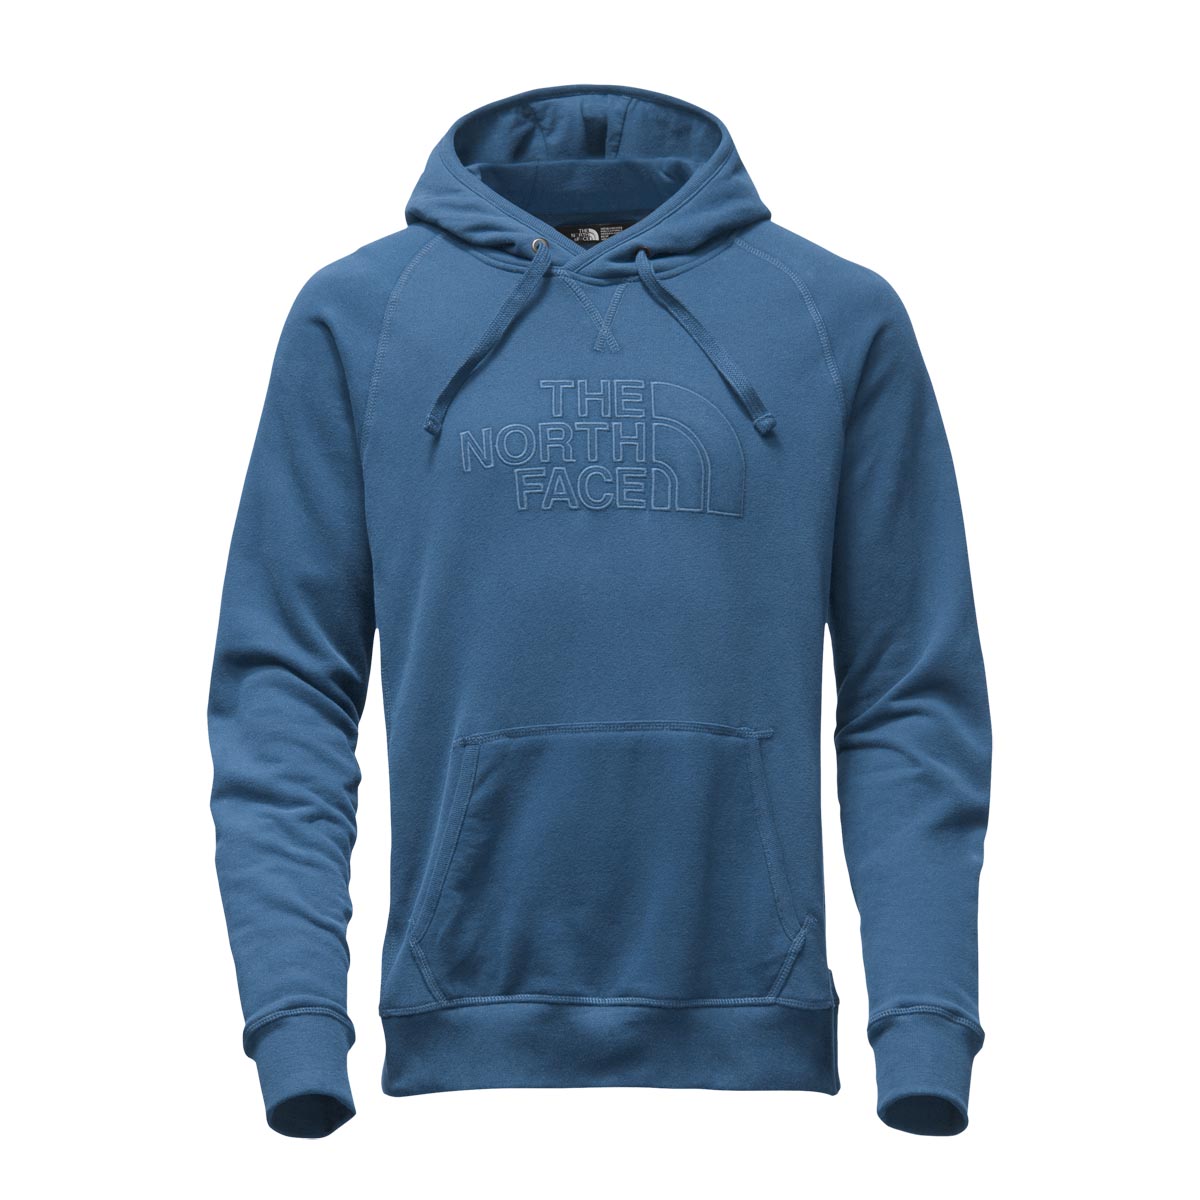 The North Face Men's Avalon Pullover Hoodie 2.0 Discontinued Pricing